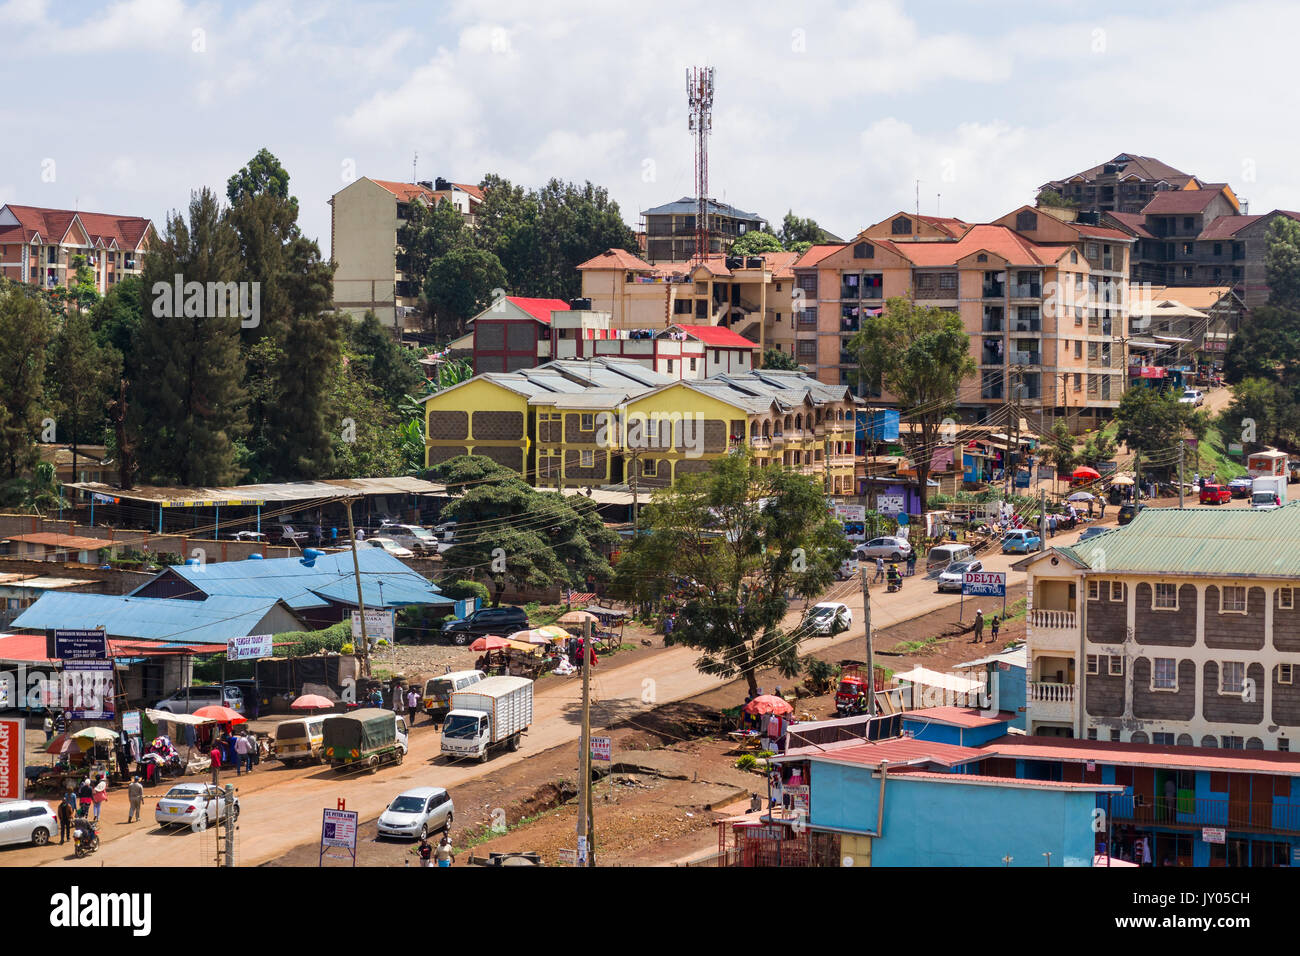 Limuru road busy street scene with people and vehicles, shops and stalls, Ruaka, Kenya Stock Photo